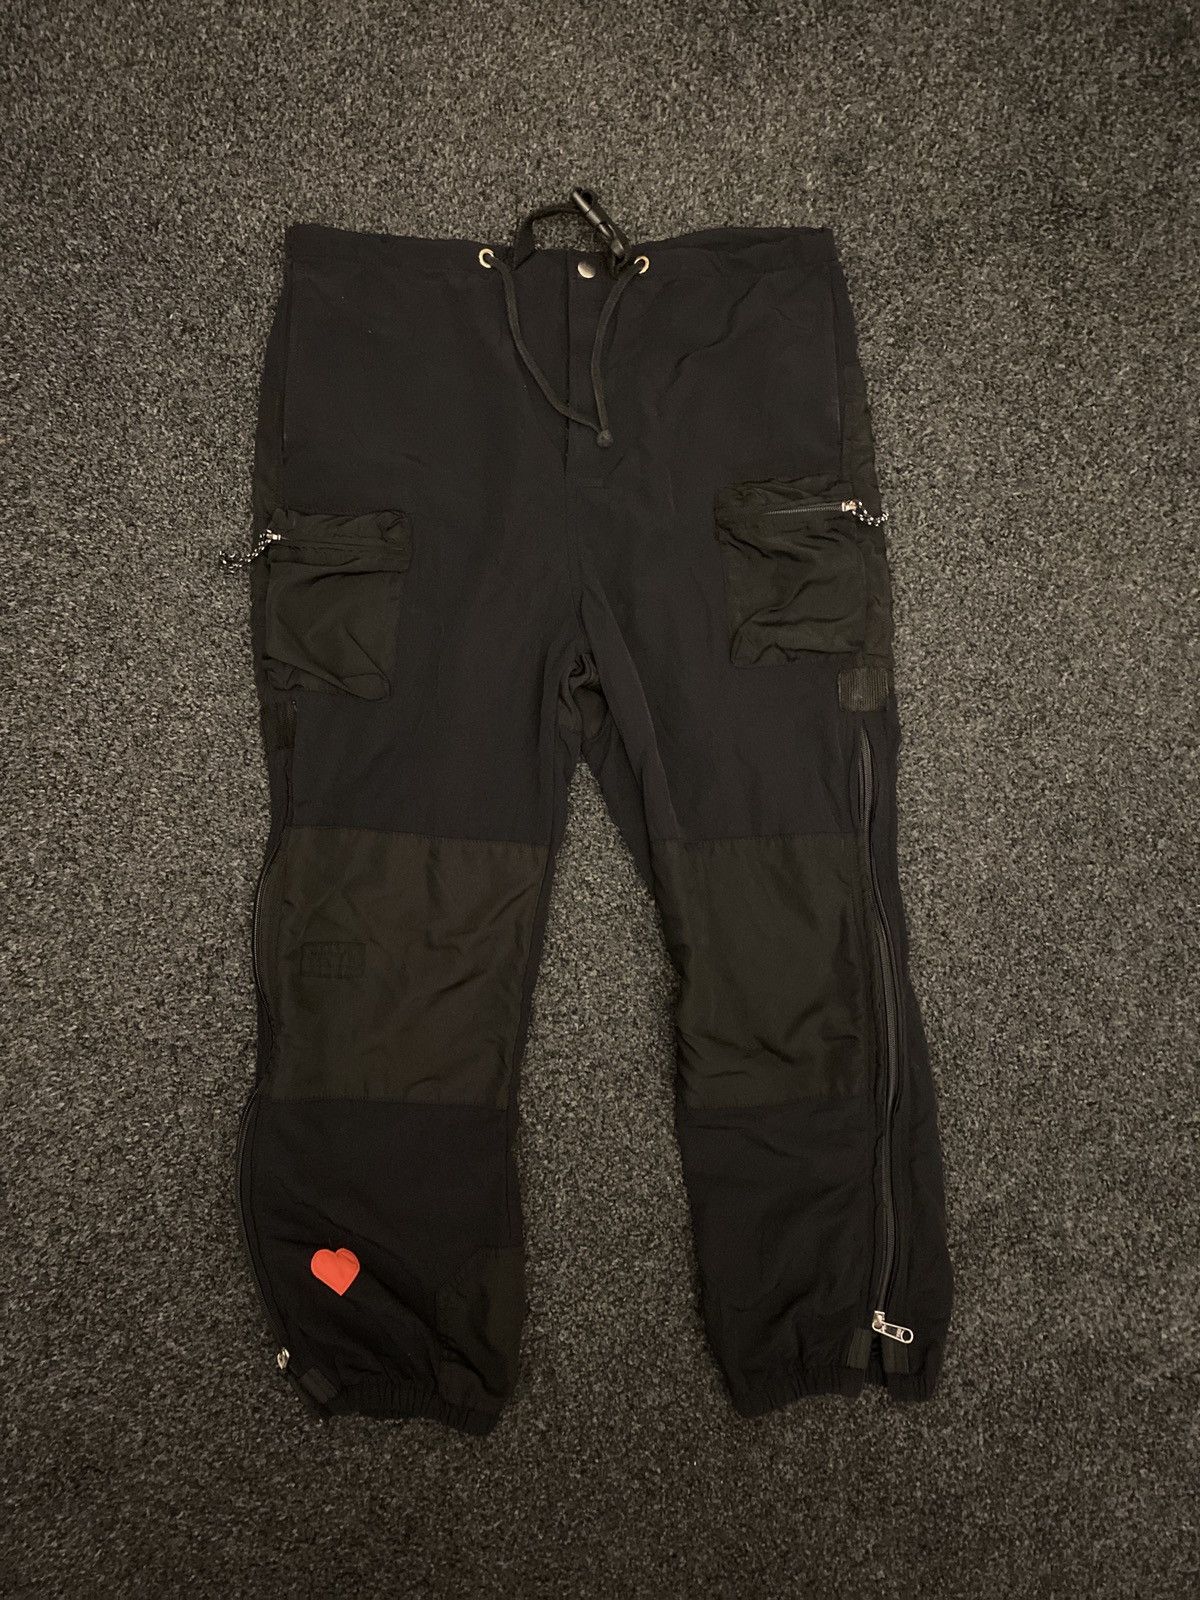 Round Two Round two hiking pants | Grailed